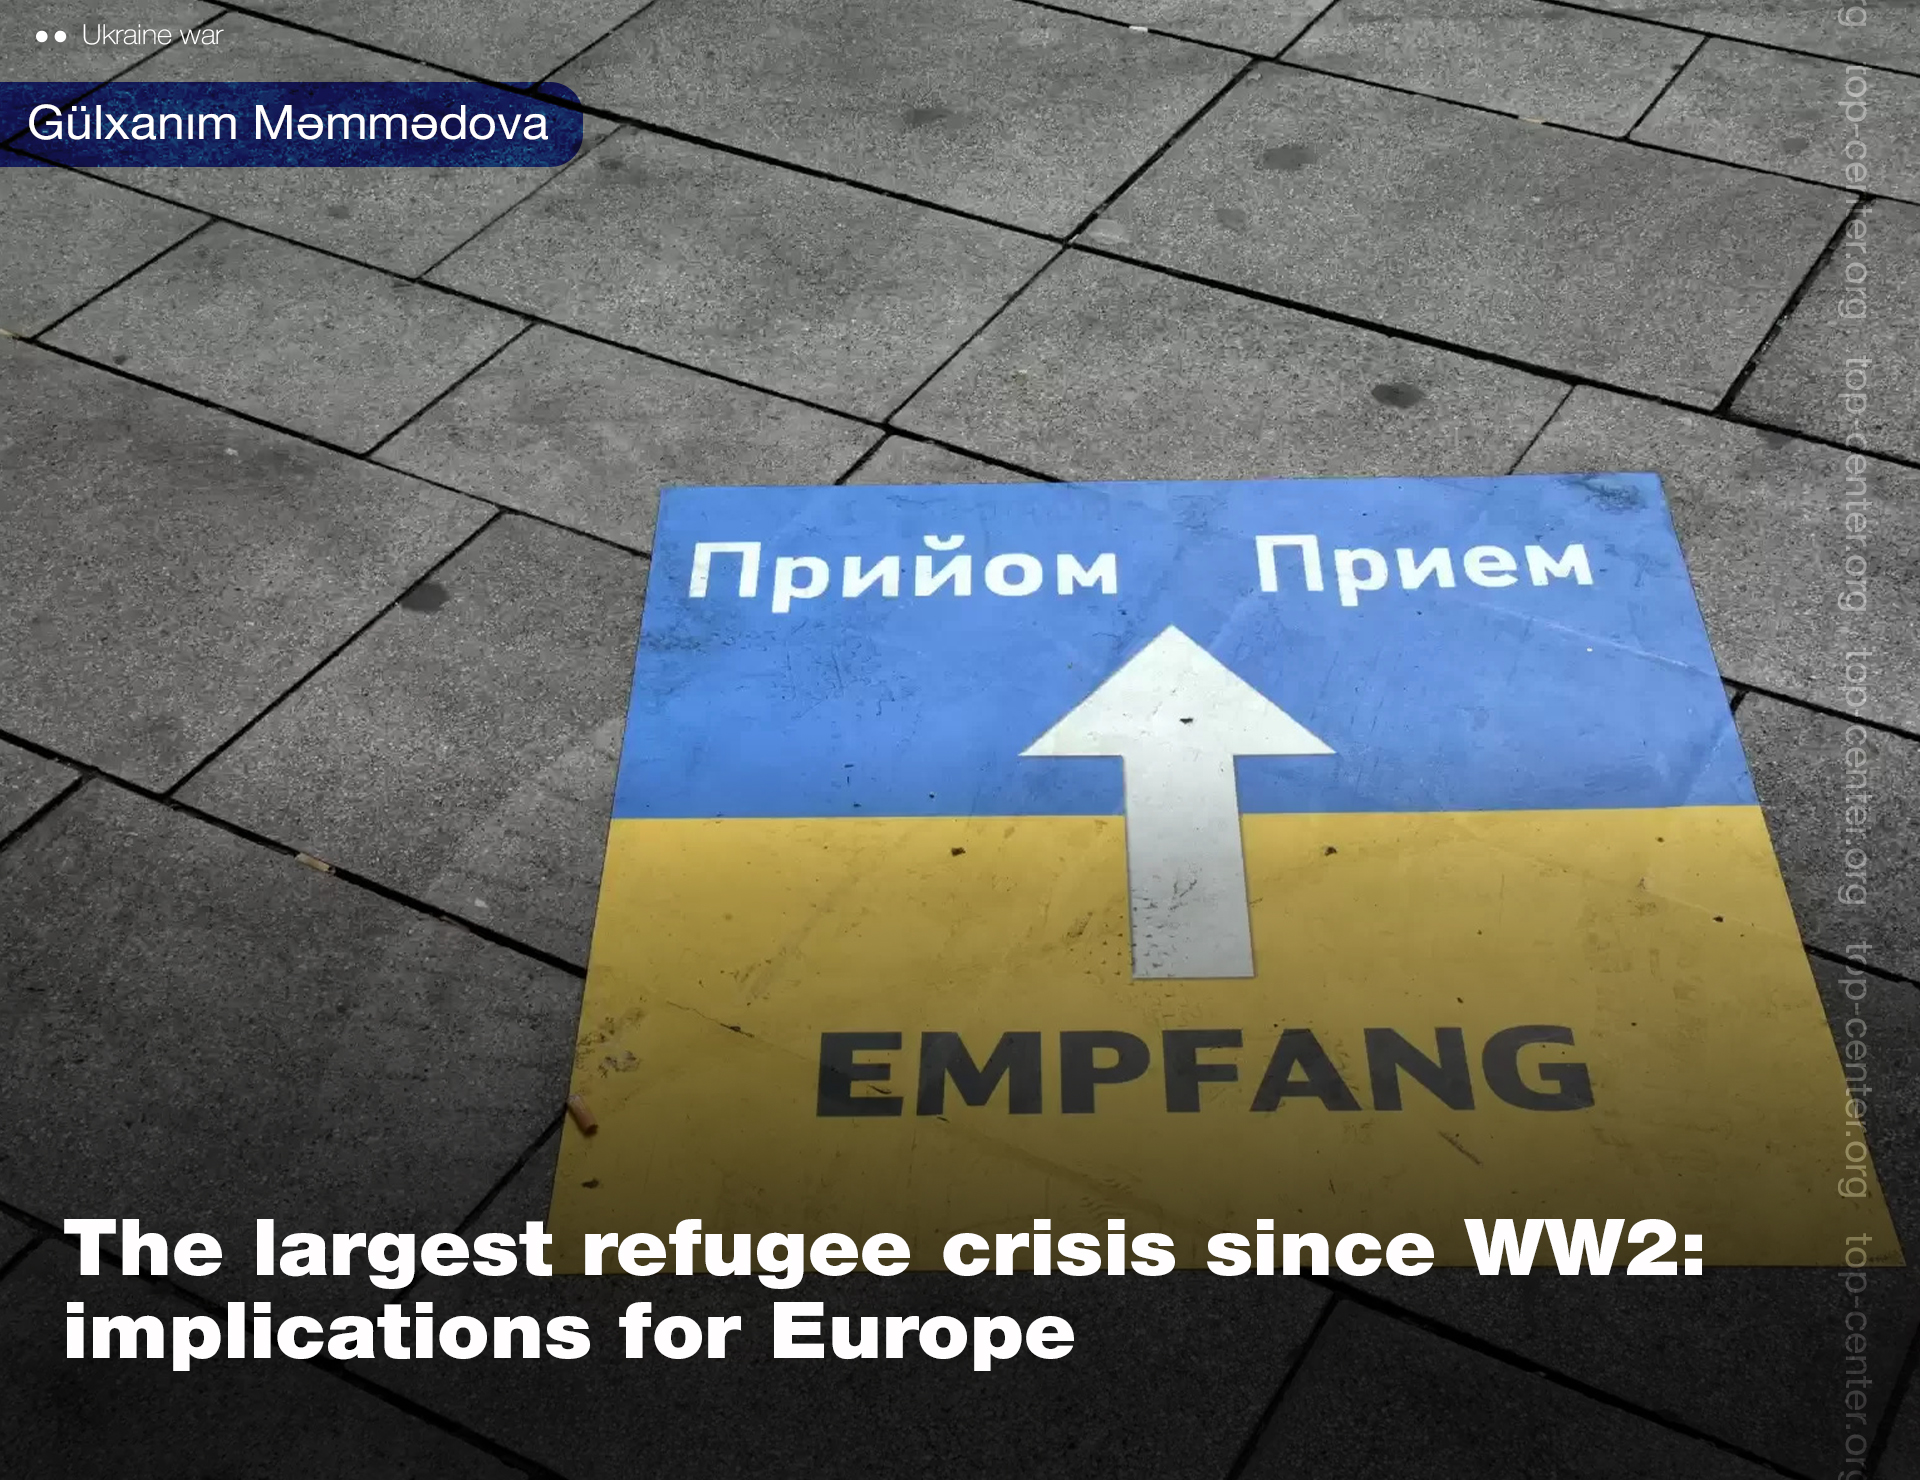 The largest refugee crisis since WW2: implications for Europe